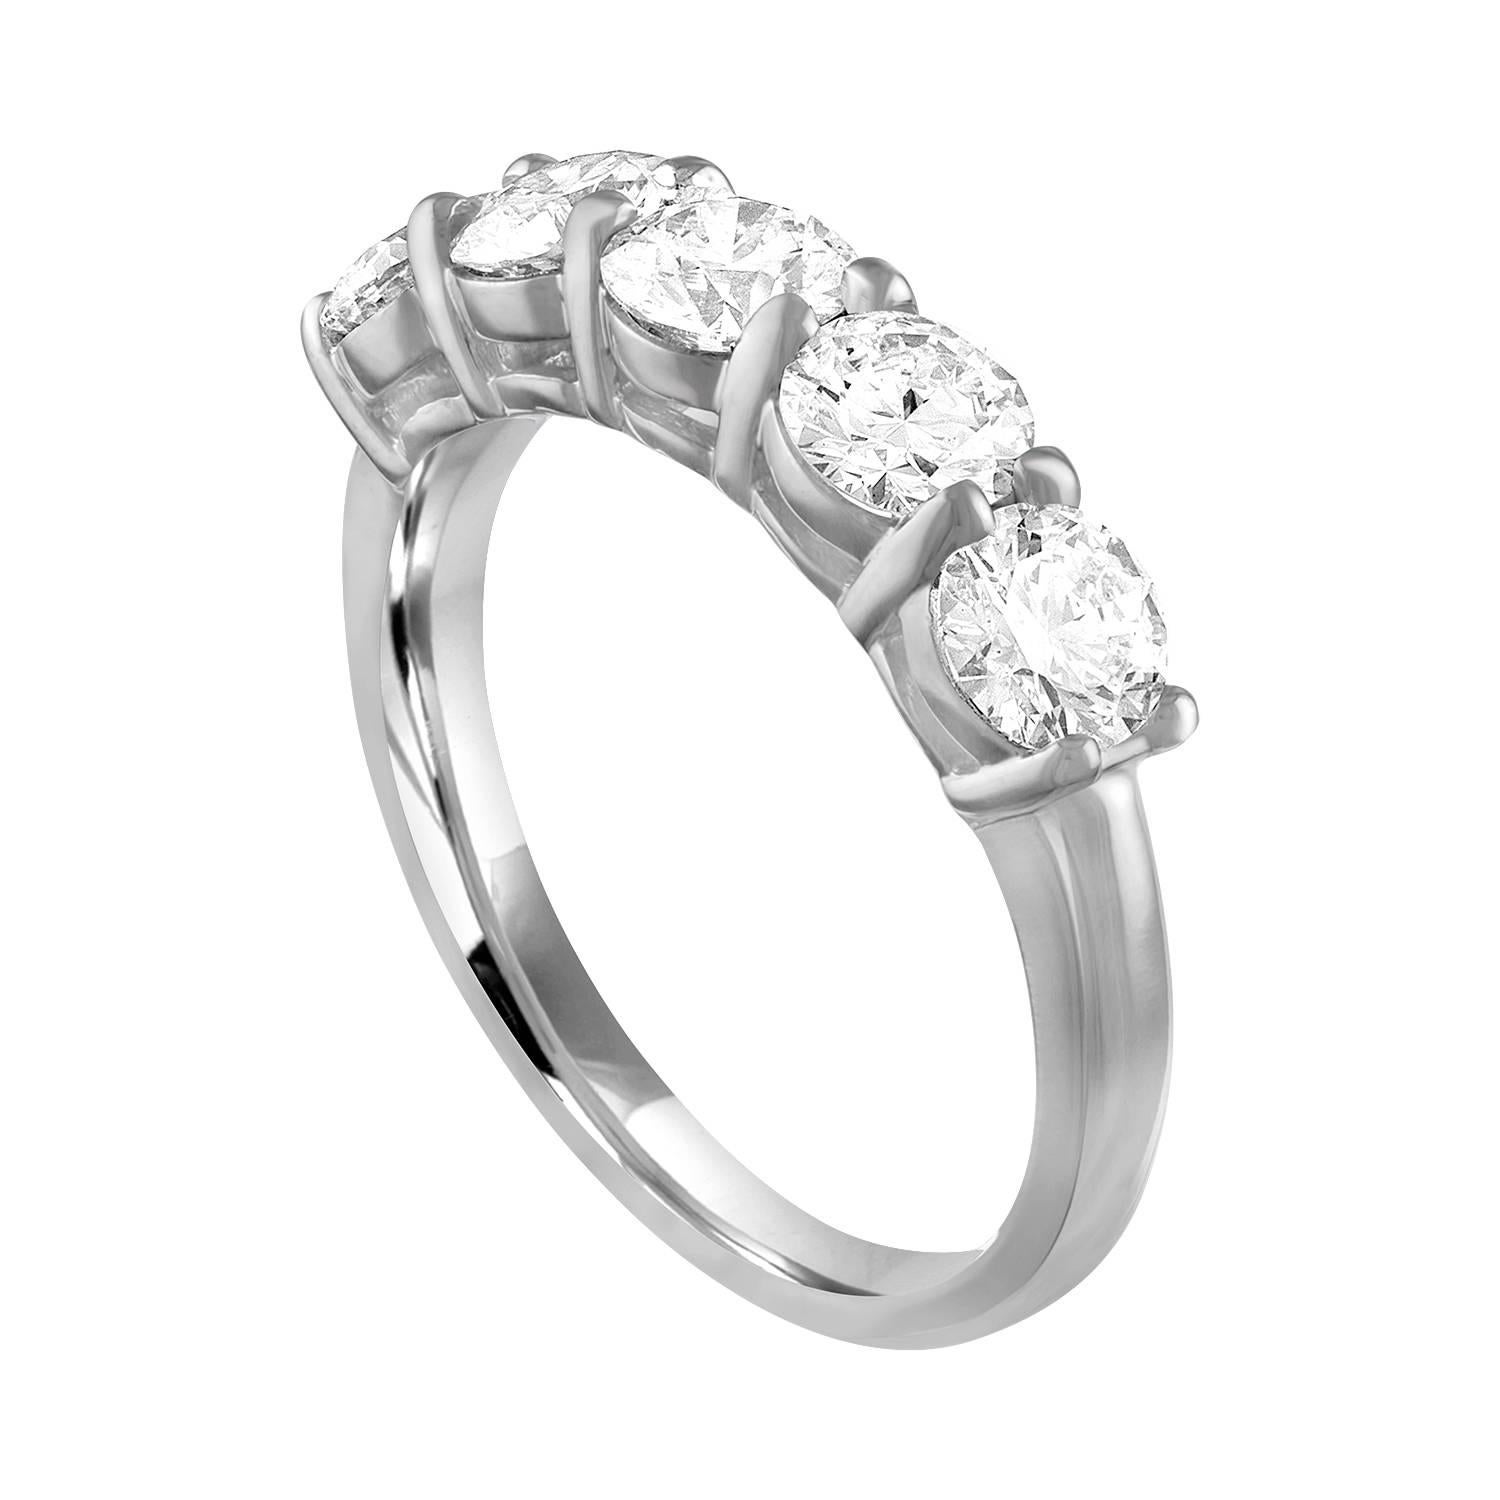 Very Beautiful Half Diamond Band Ring.
The ring is 14K White Gold.
There are 5 Round Cut Diamonds prong set.
There are 1.75 Carats In Diamonds H/I VS.
The ring is a size 6.75, sizable. 
The band is 4.59 mm wide and tapers down to 2.13 mm.
The ring